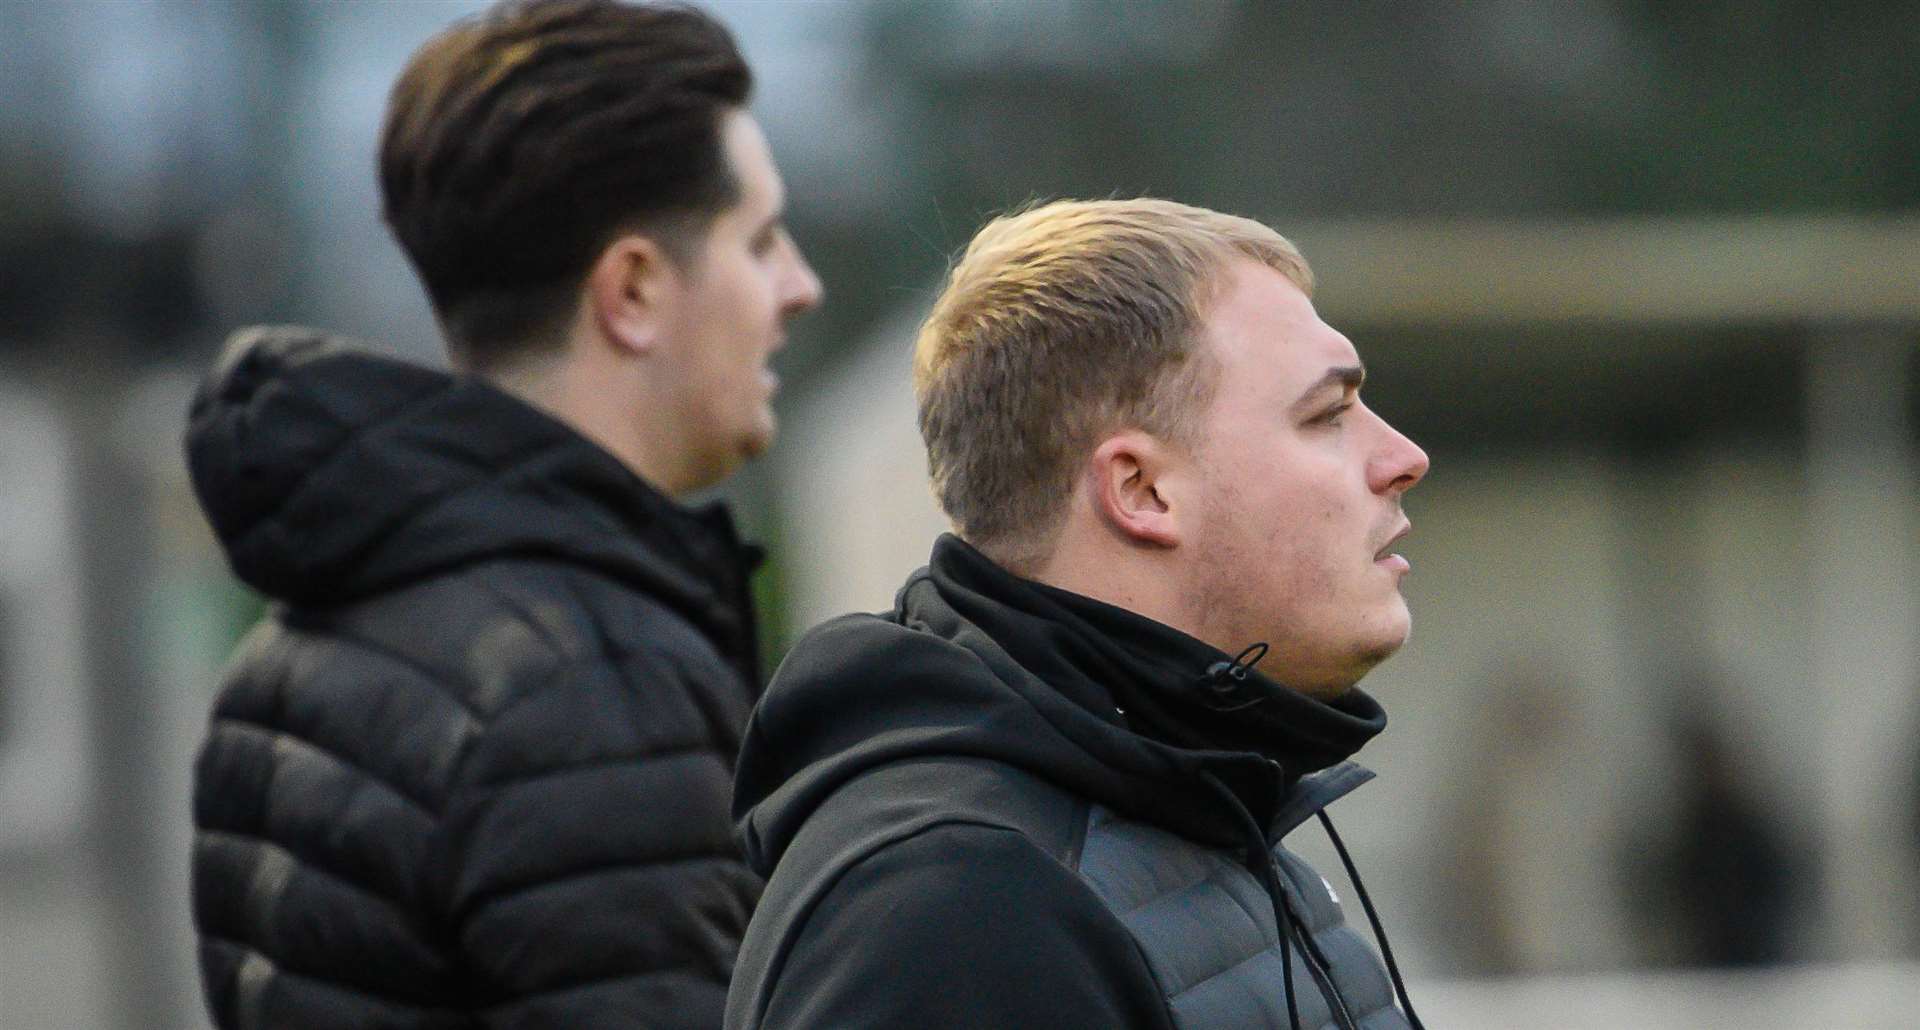 Canterbury City joint-managers Chris Woollcott and Josh Hall